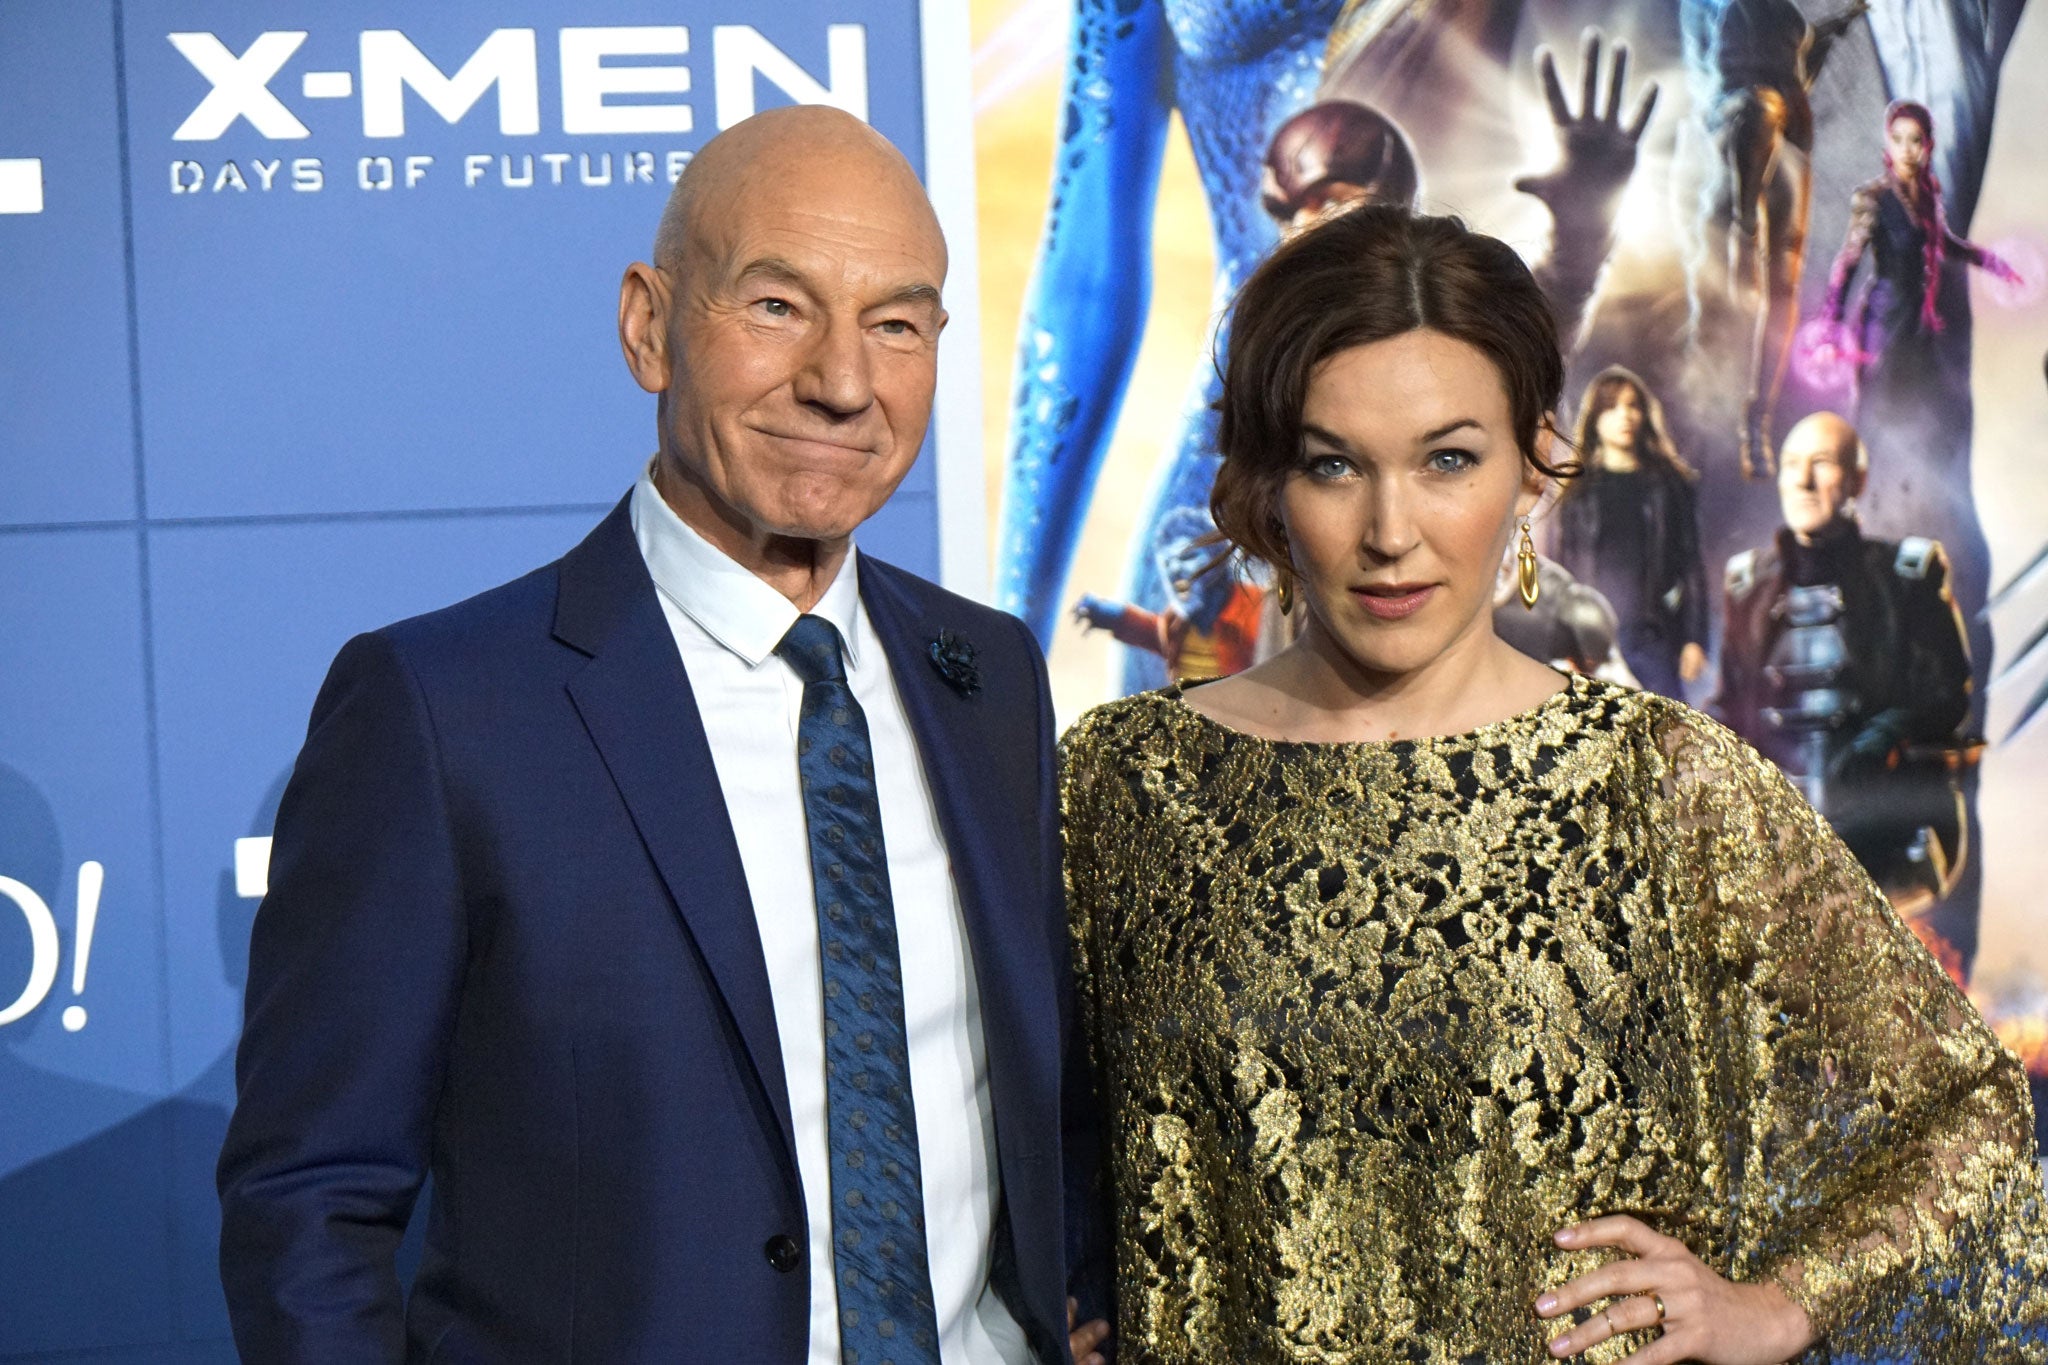 Patrick Stewart with wife Sunny Ozell at the X-Men: Days Of Future Past premiere in New York, May, 2014